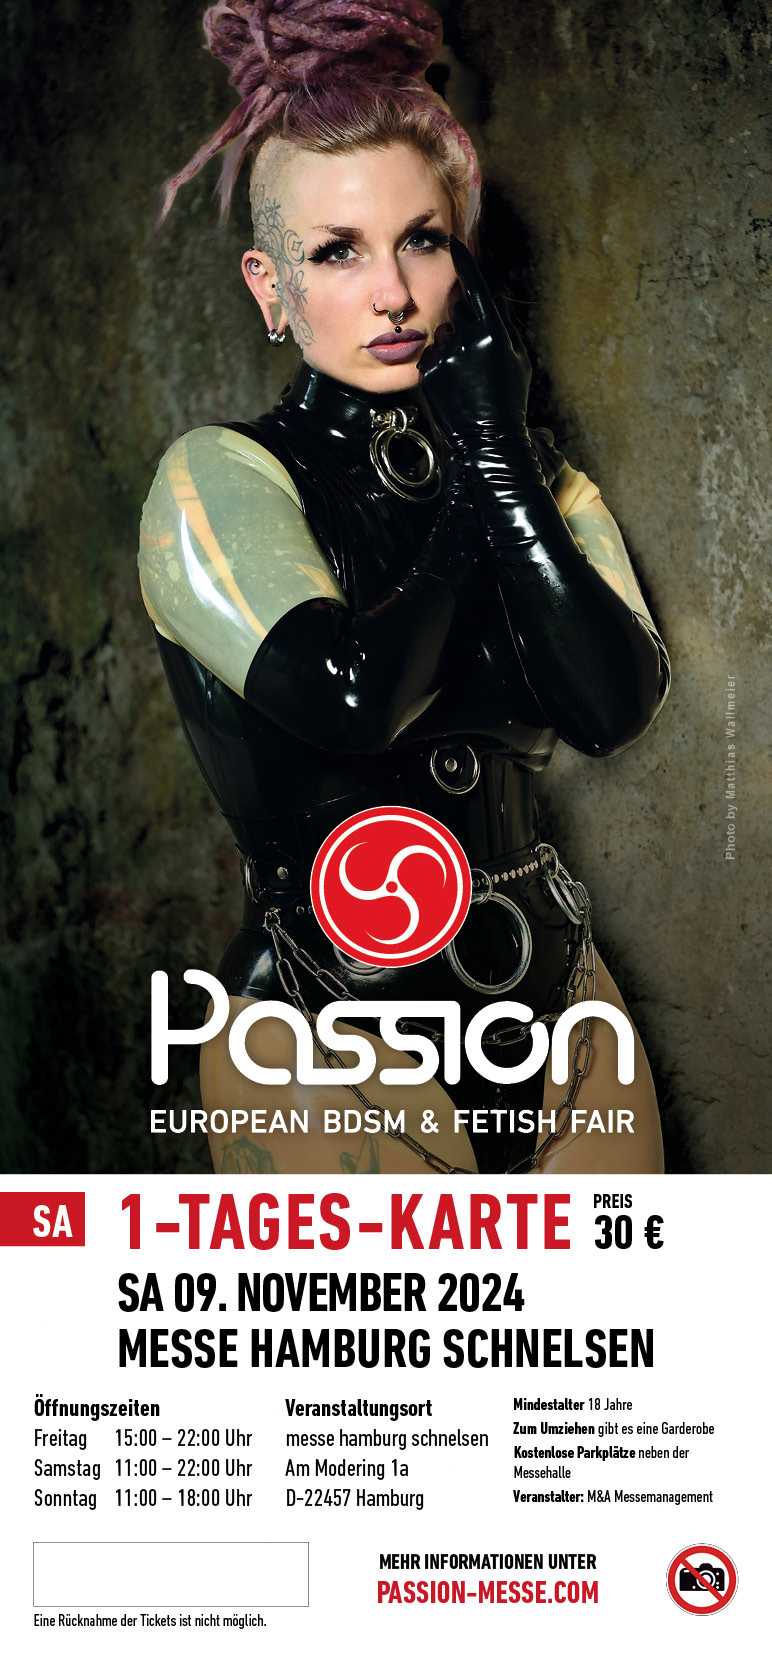 Passion Messe - 1-Tages-Messeticket Samstag